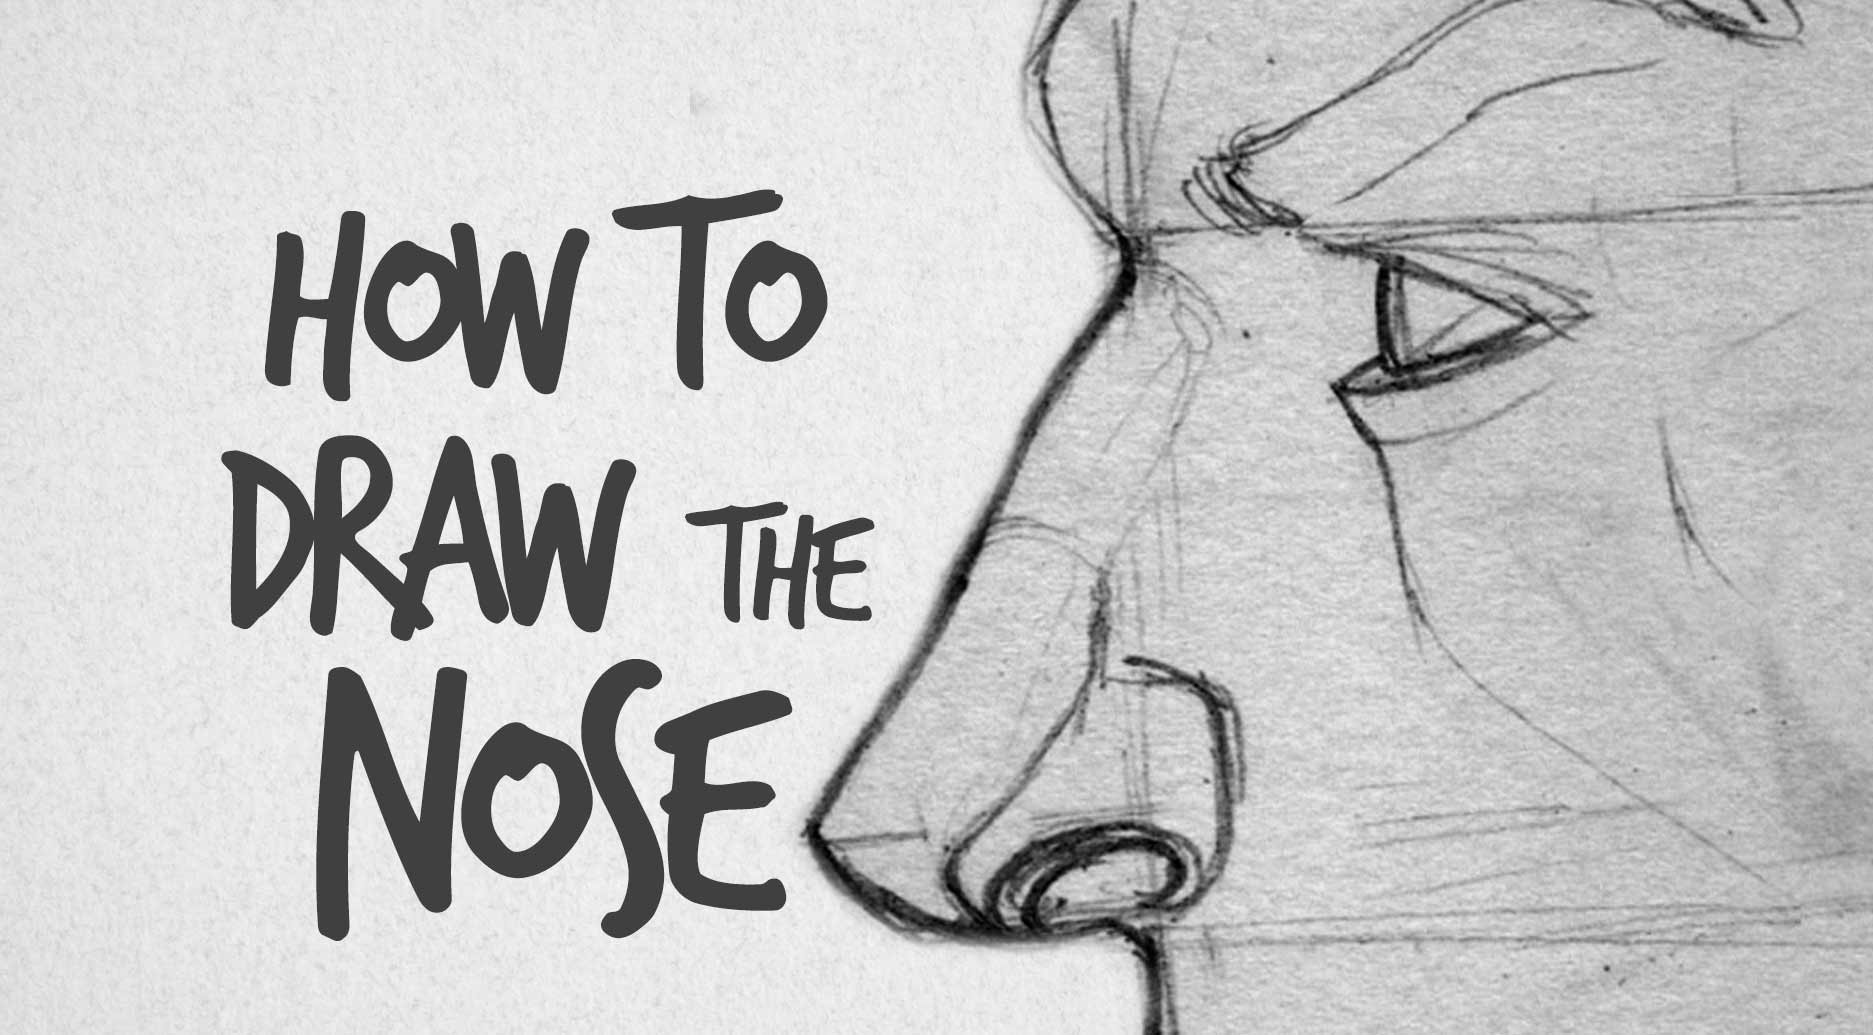 LEARN HOW TO DRAW A NOSE IN 6 EASY STEPS  Improveyourdrawingscom